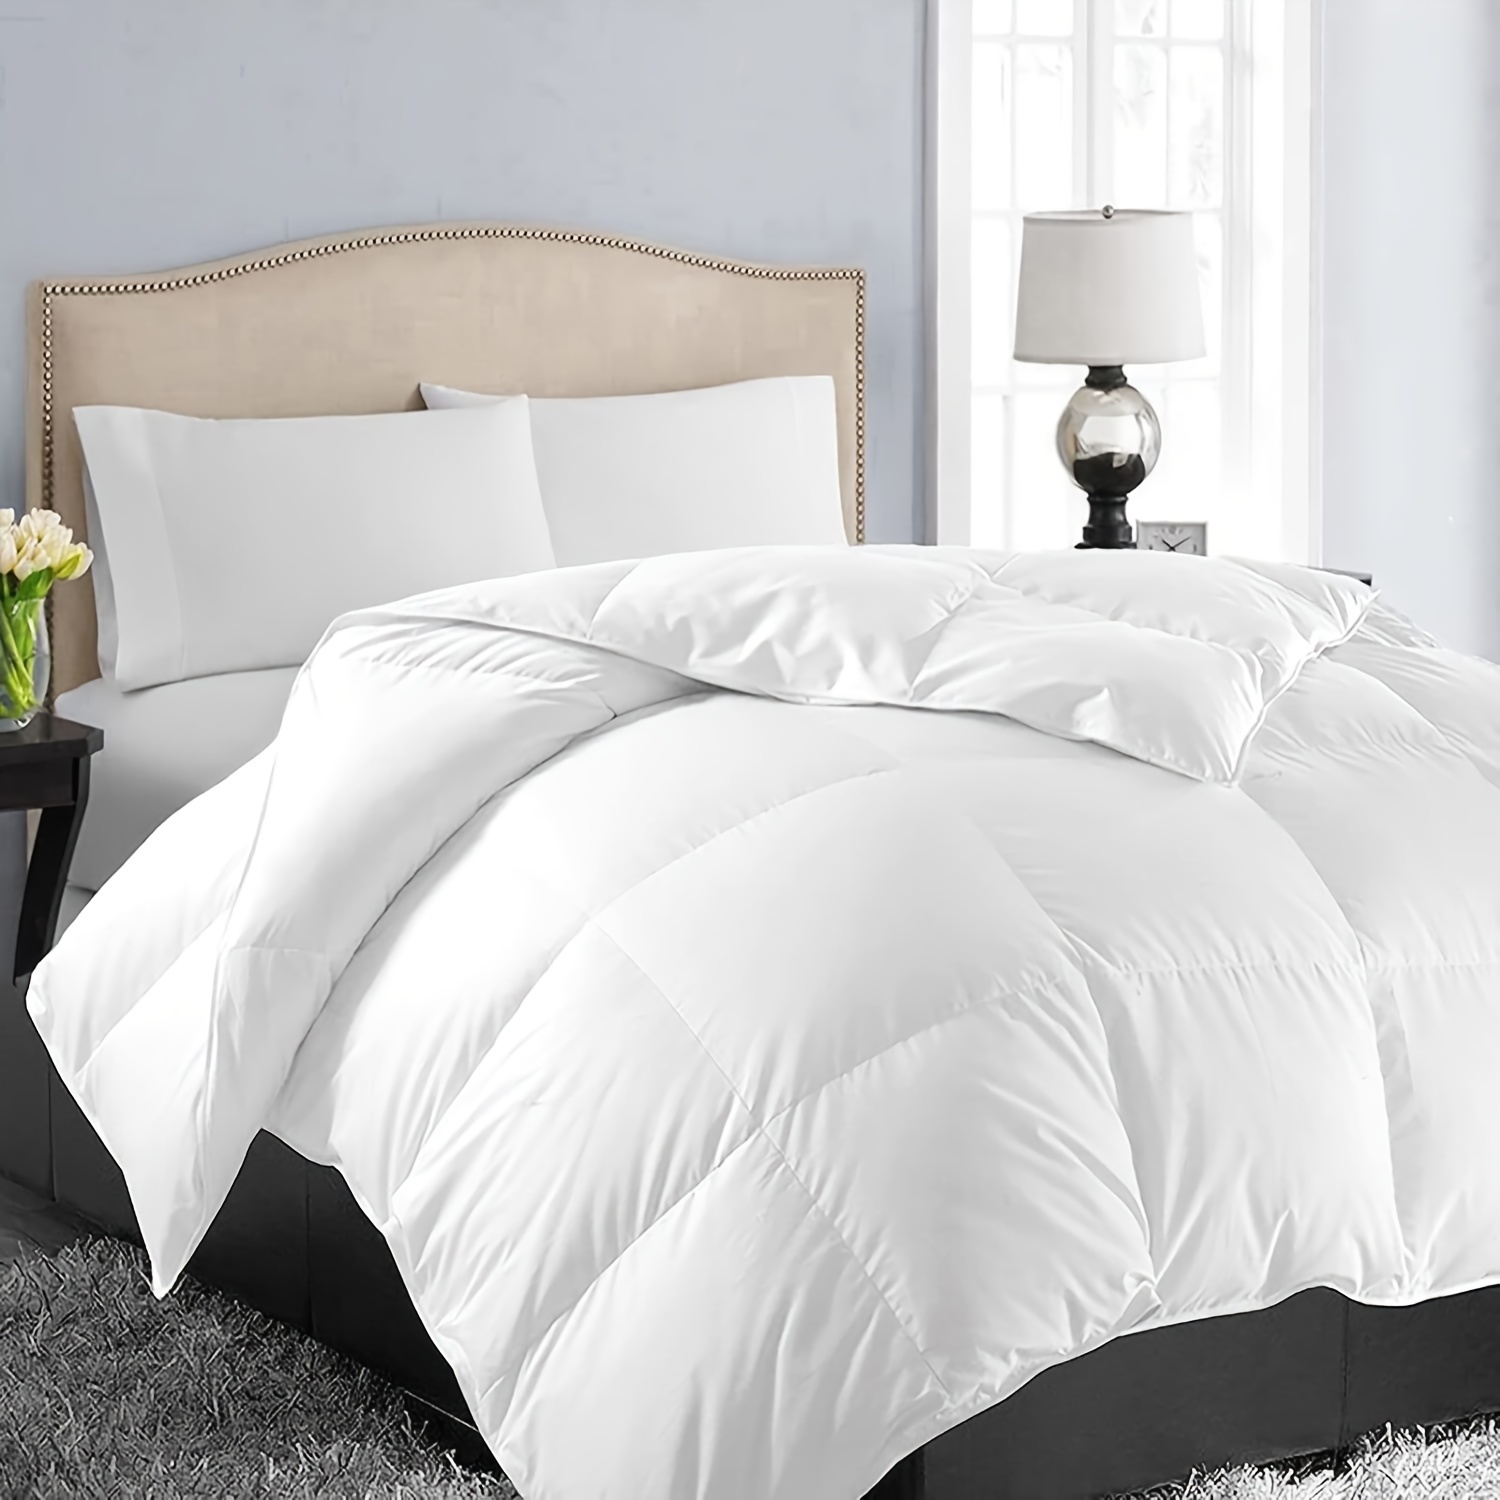 1pc luxury fluffy breathable all season comforter 350gsm down alternative fill premium heavyweight brushed fabric double stitched corded edging duvet corner loops machine washable